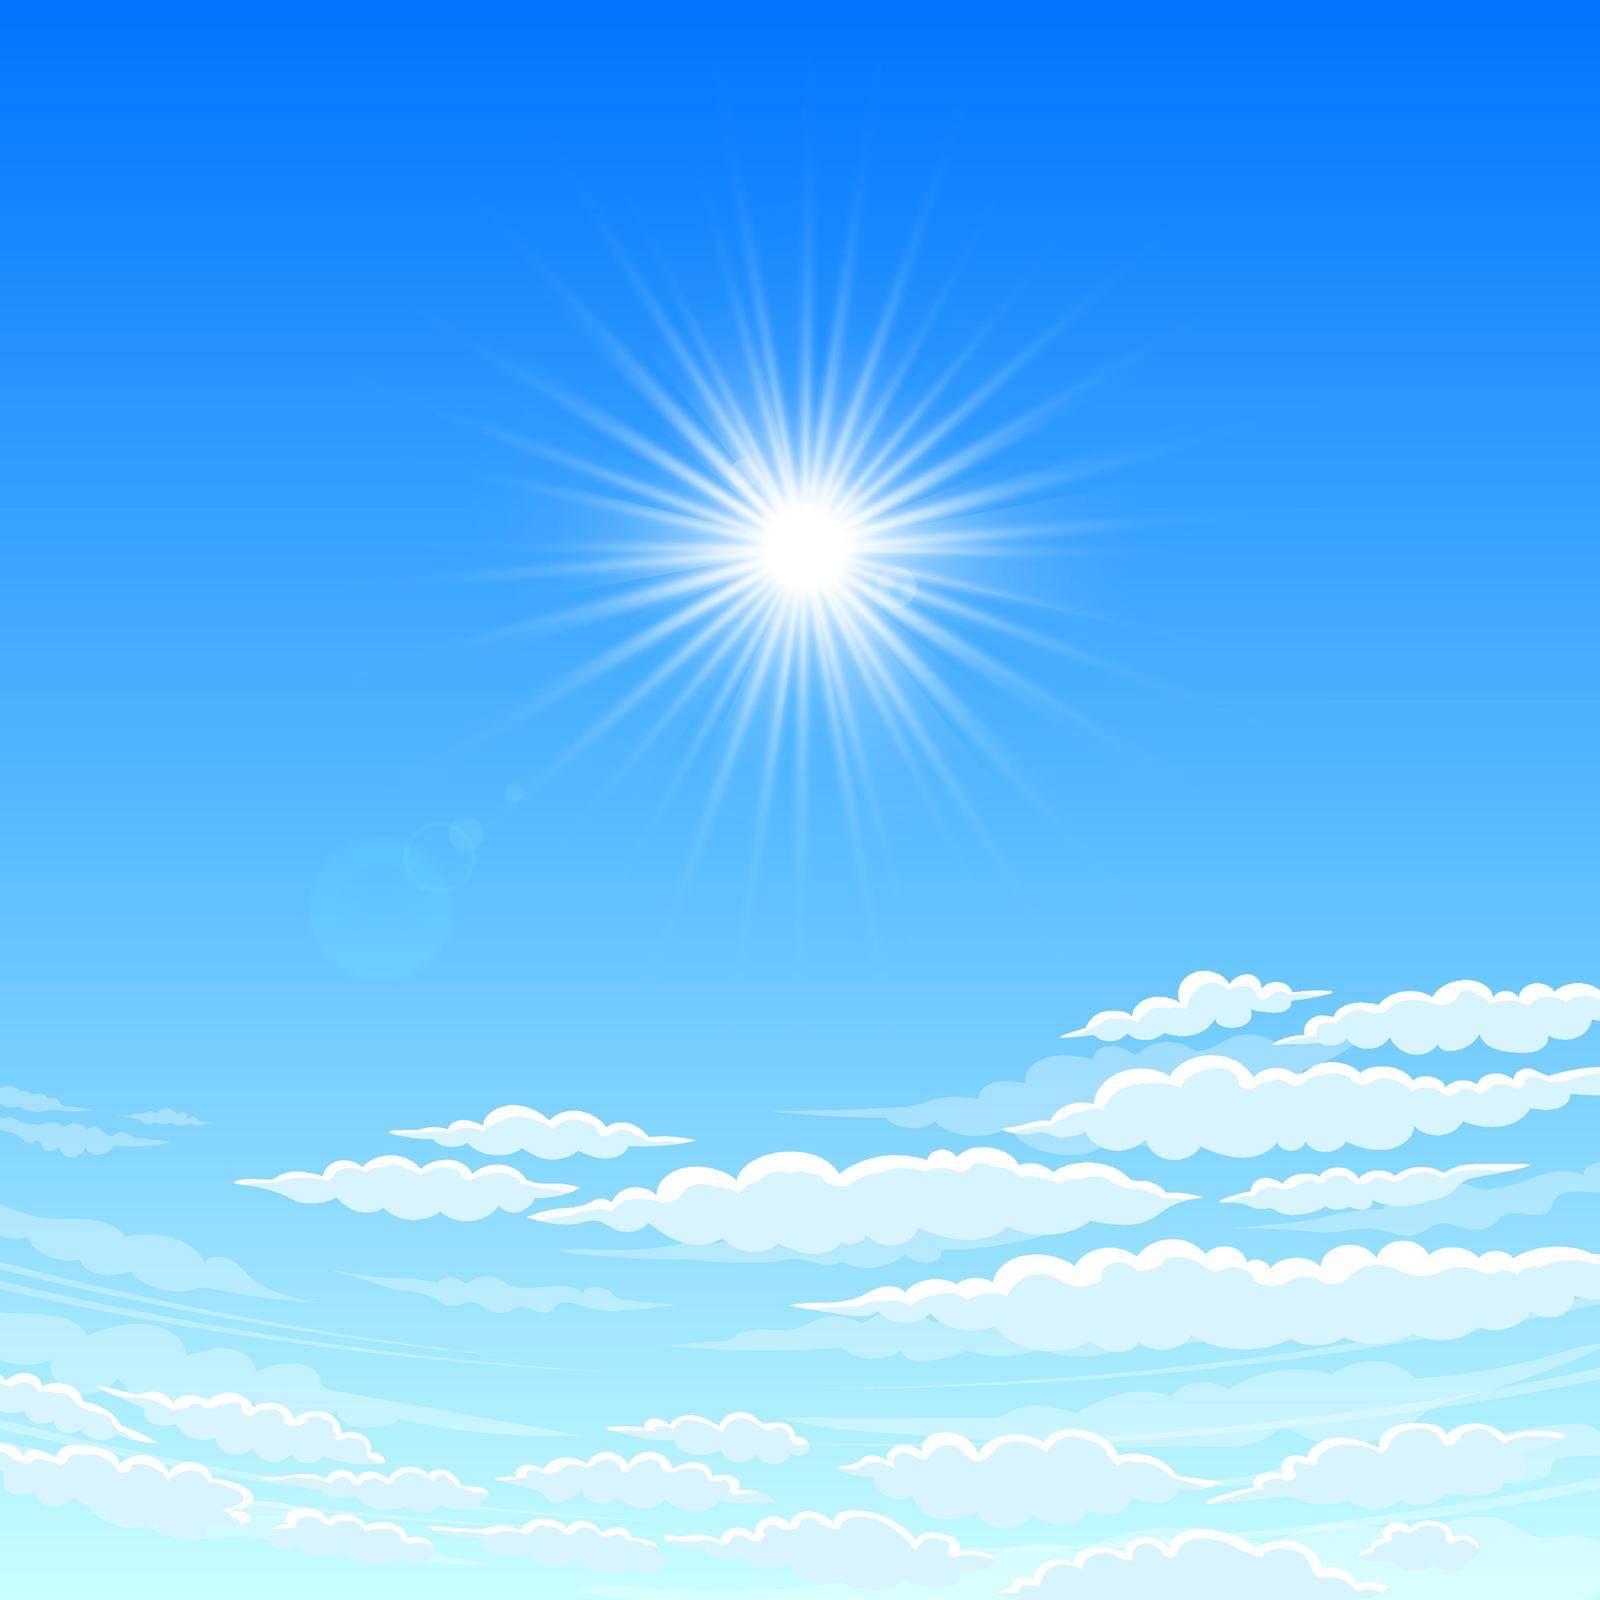 Sky, cloudy day And the sun shining. Vector Sky Background